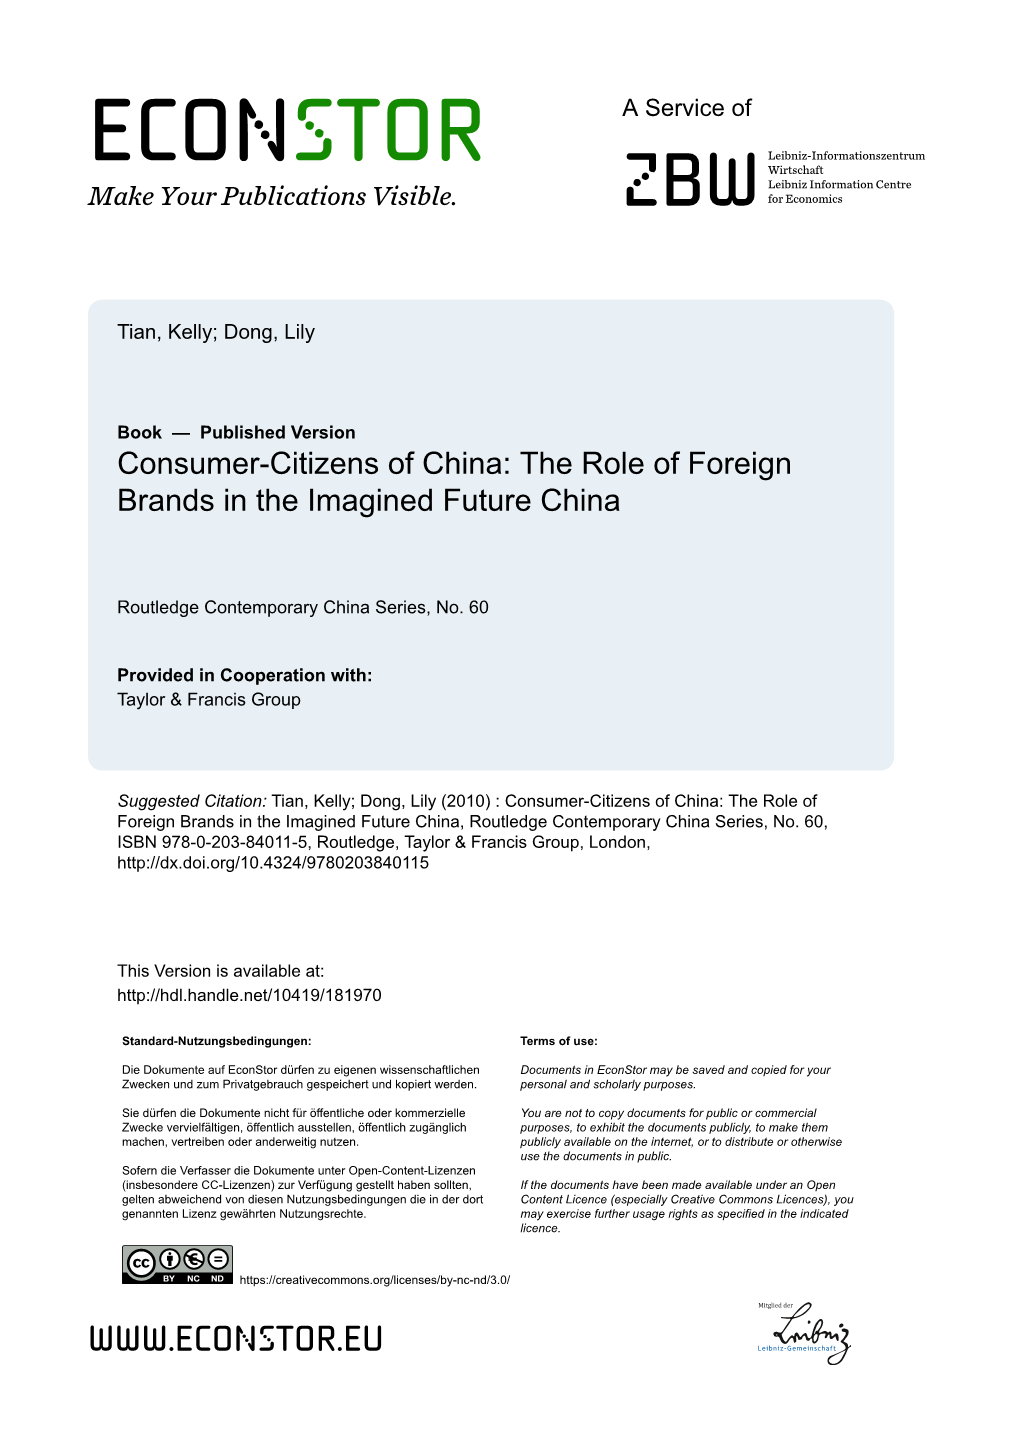 Consumer-Citizens of China: the Role of Foreign Brands in the Imagined Future China